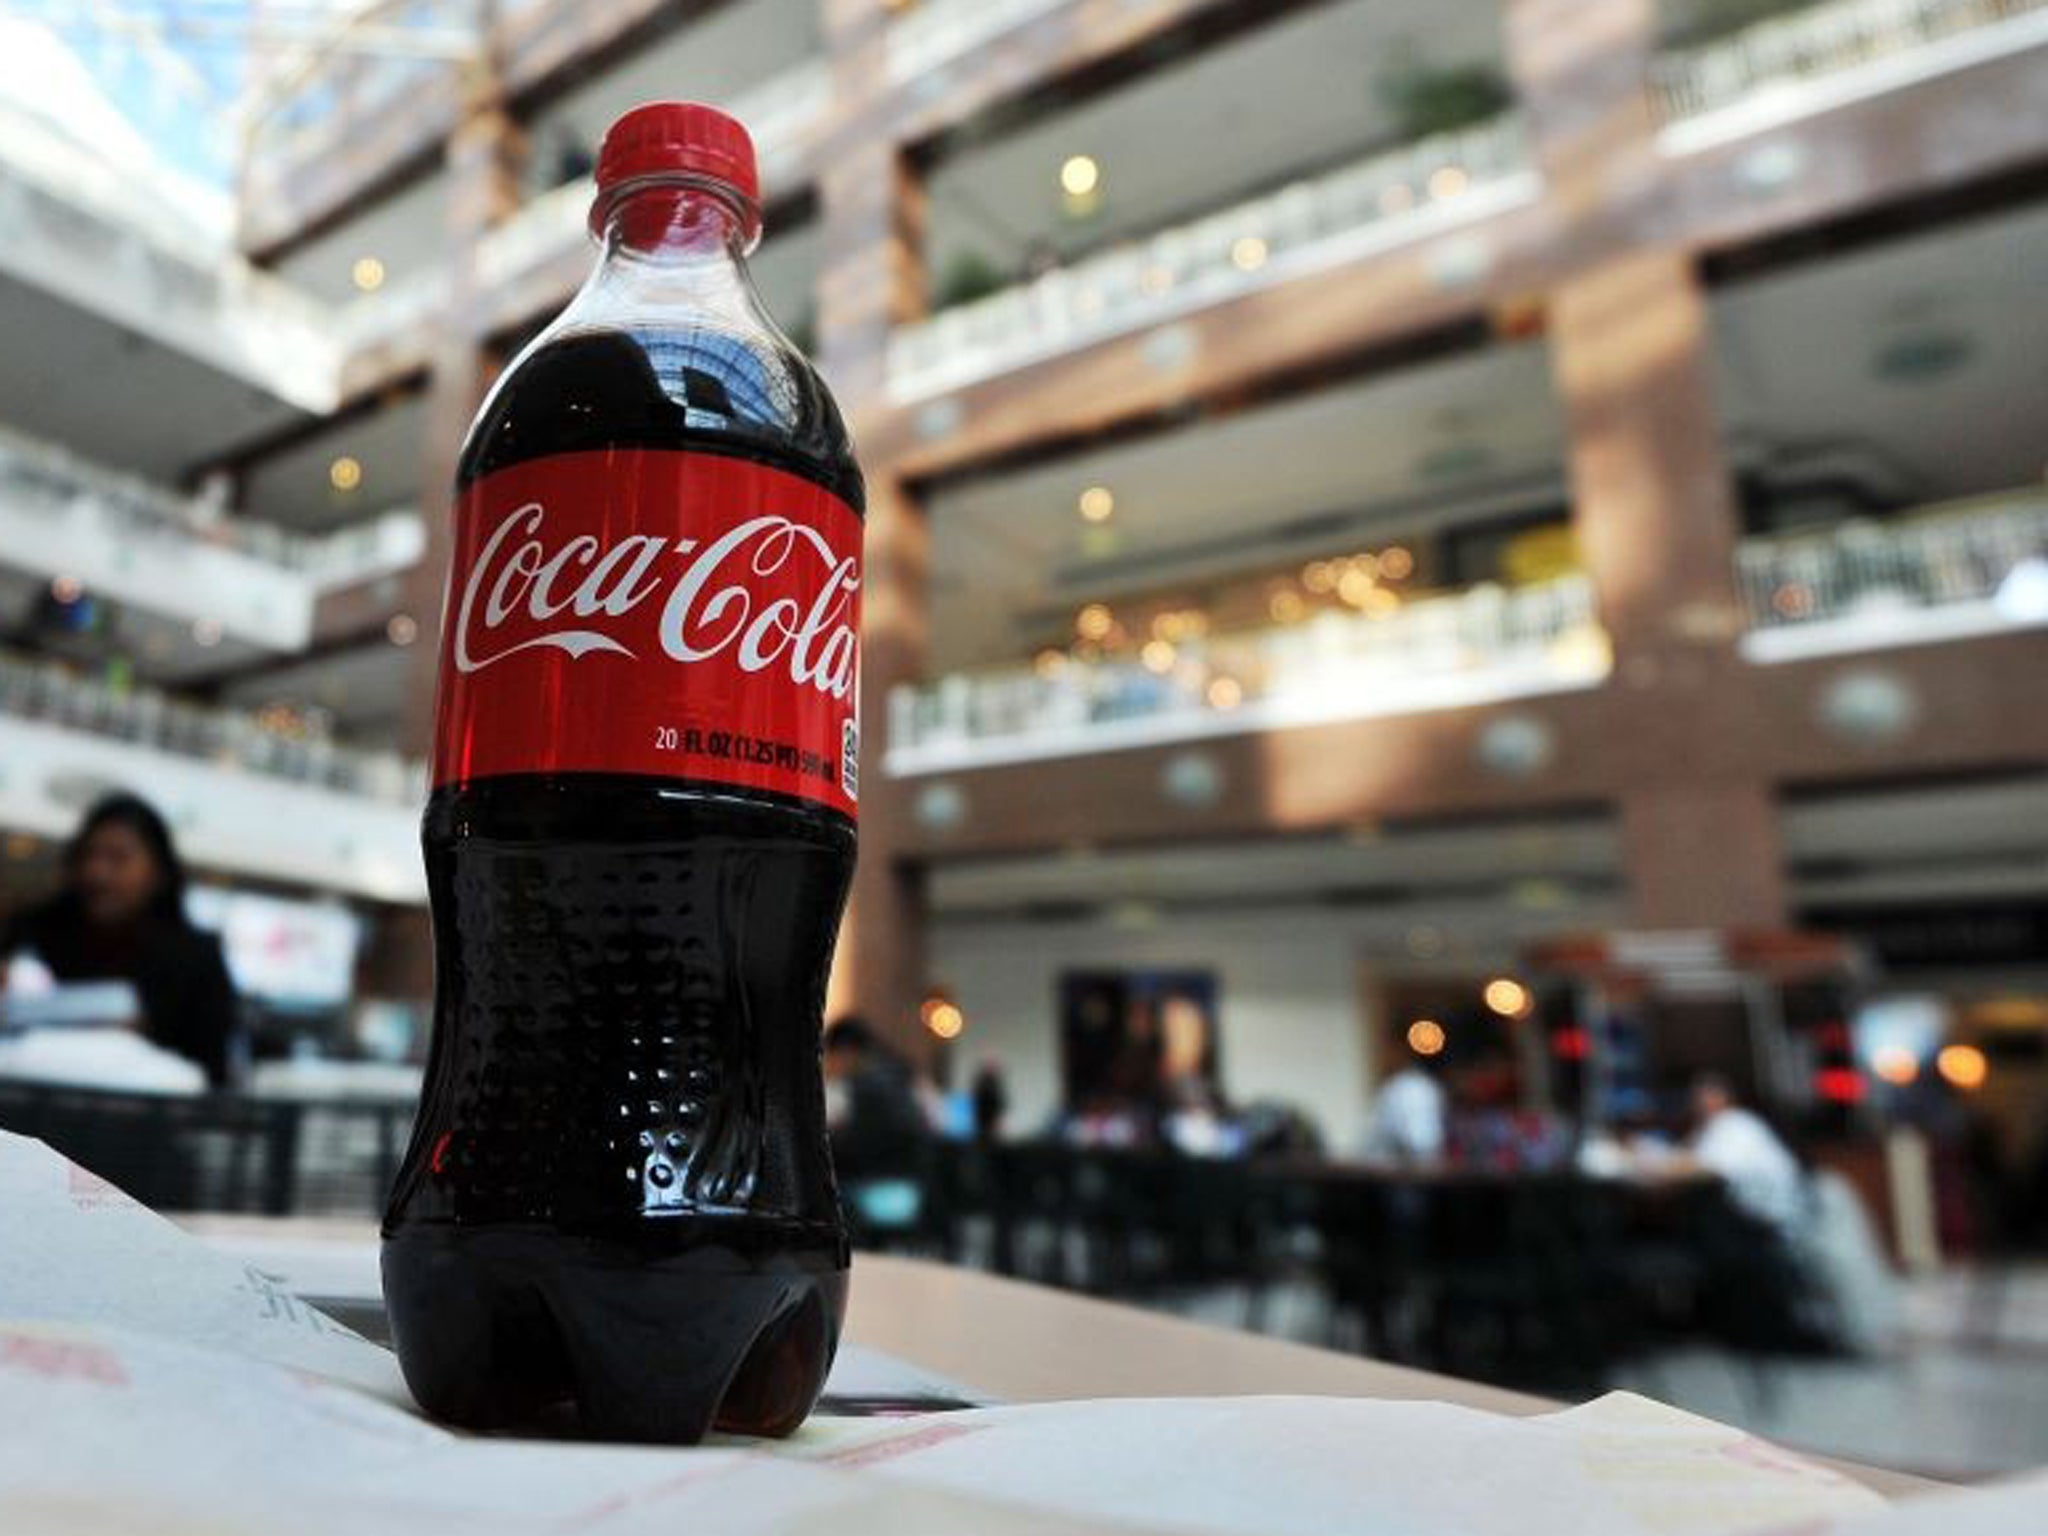 The recipe behind Coca-Cola is one of the world's most closely-guarded secrets